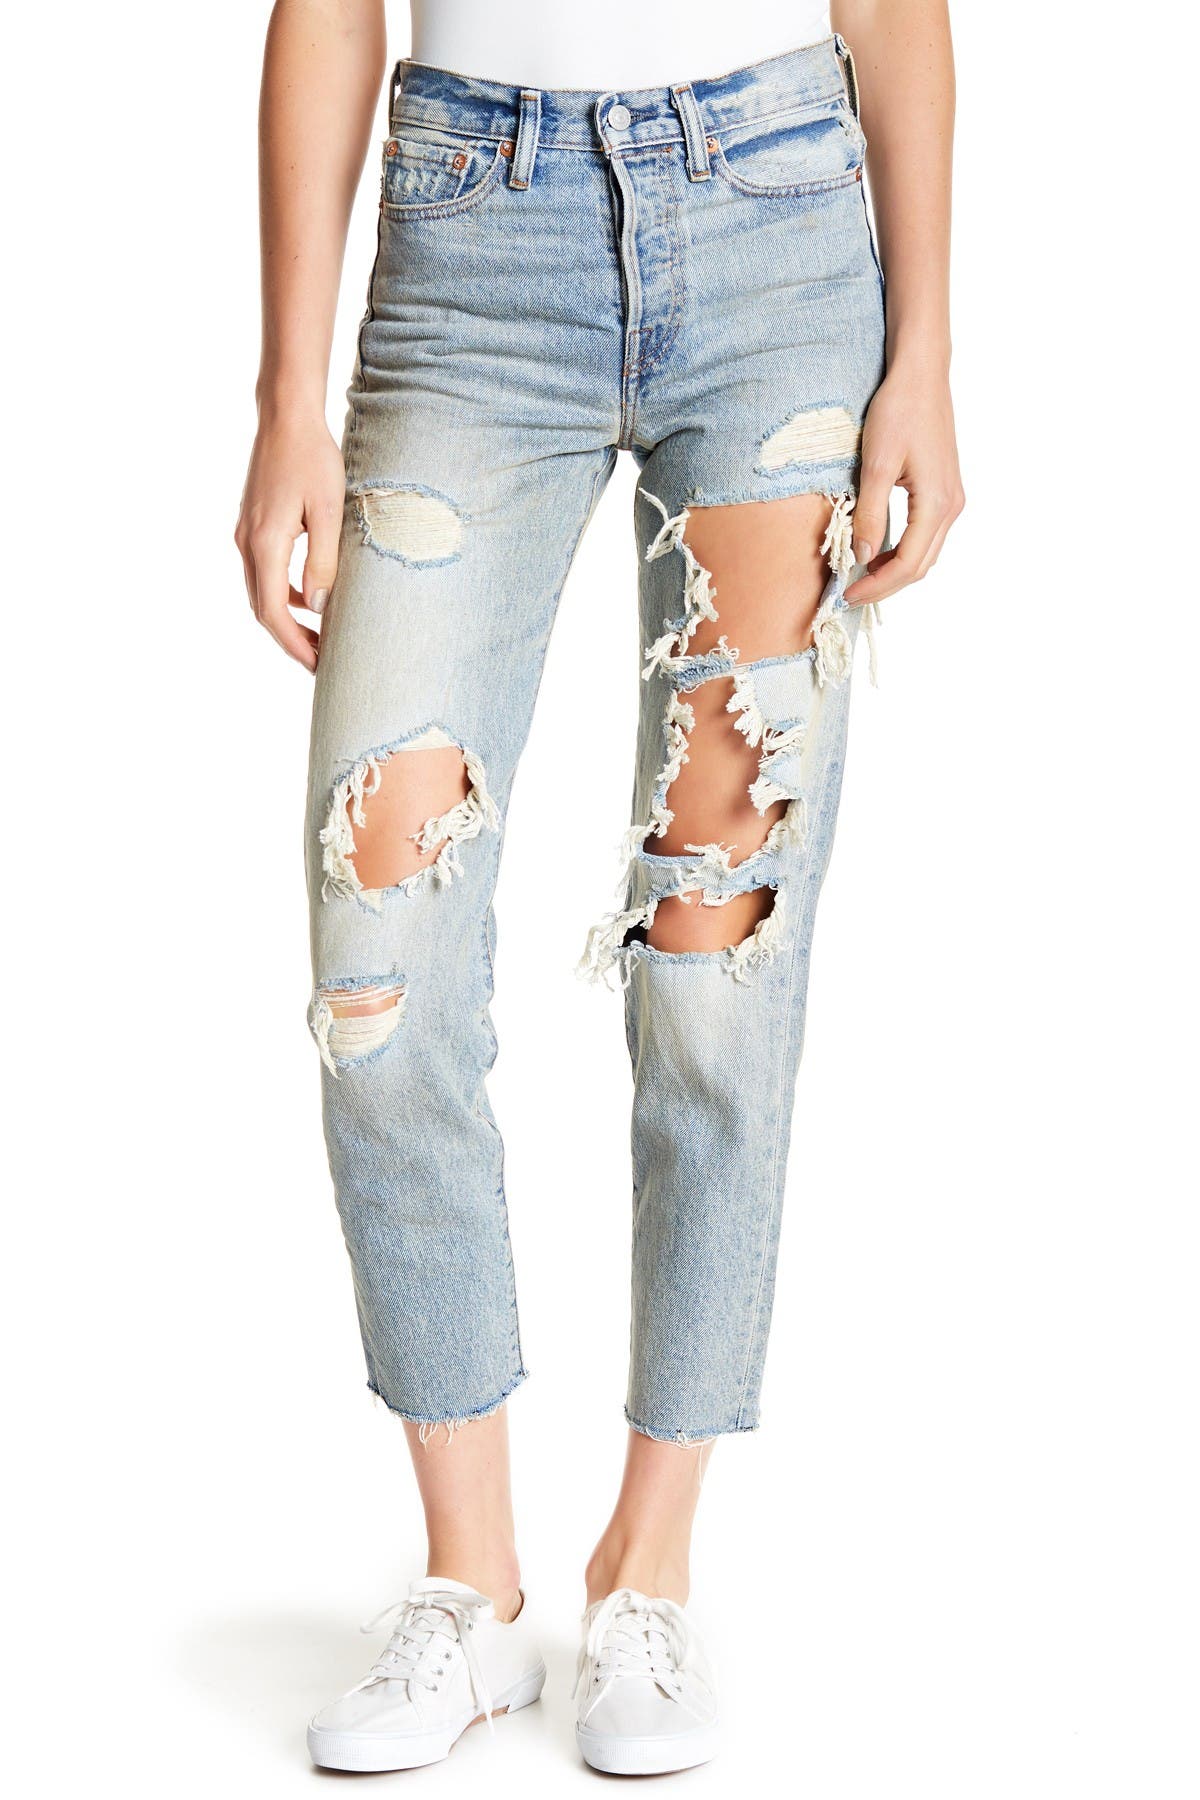 levi's wedgie fit distressed jeans